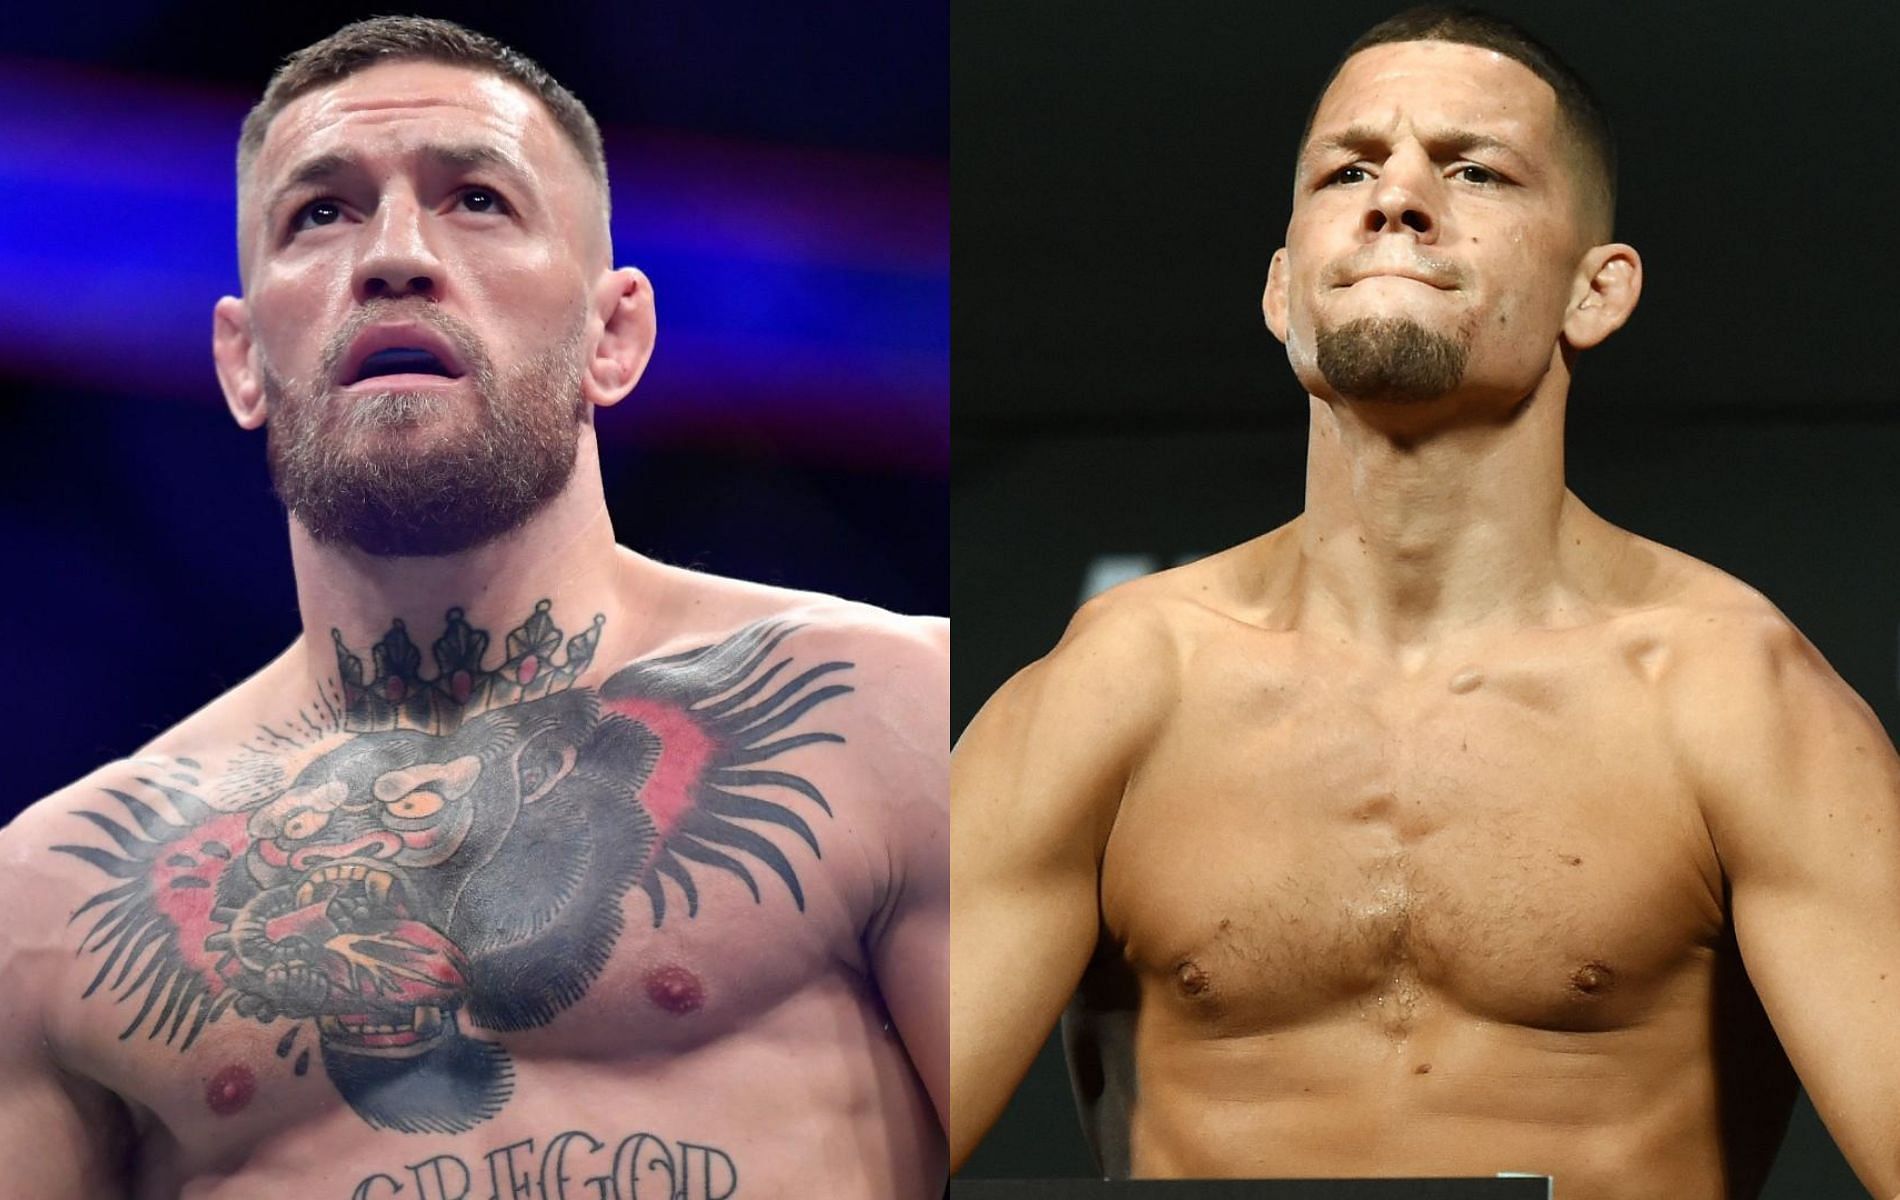 Conor McGregor (left) and Nate Diaz (right)